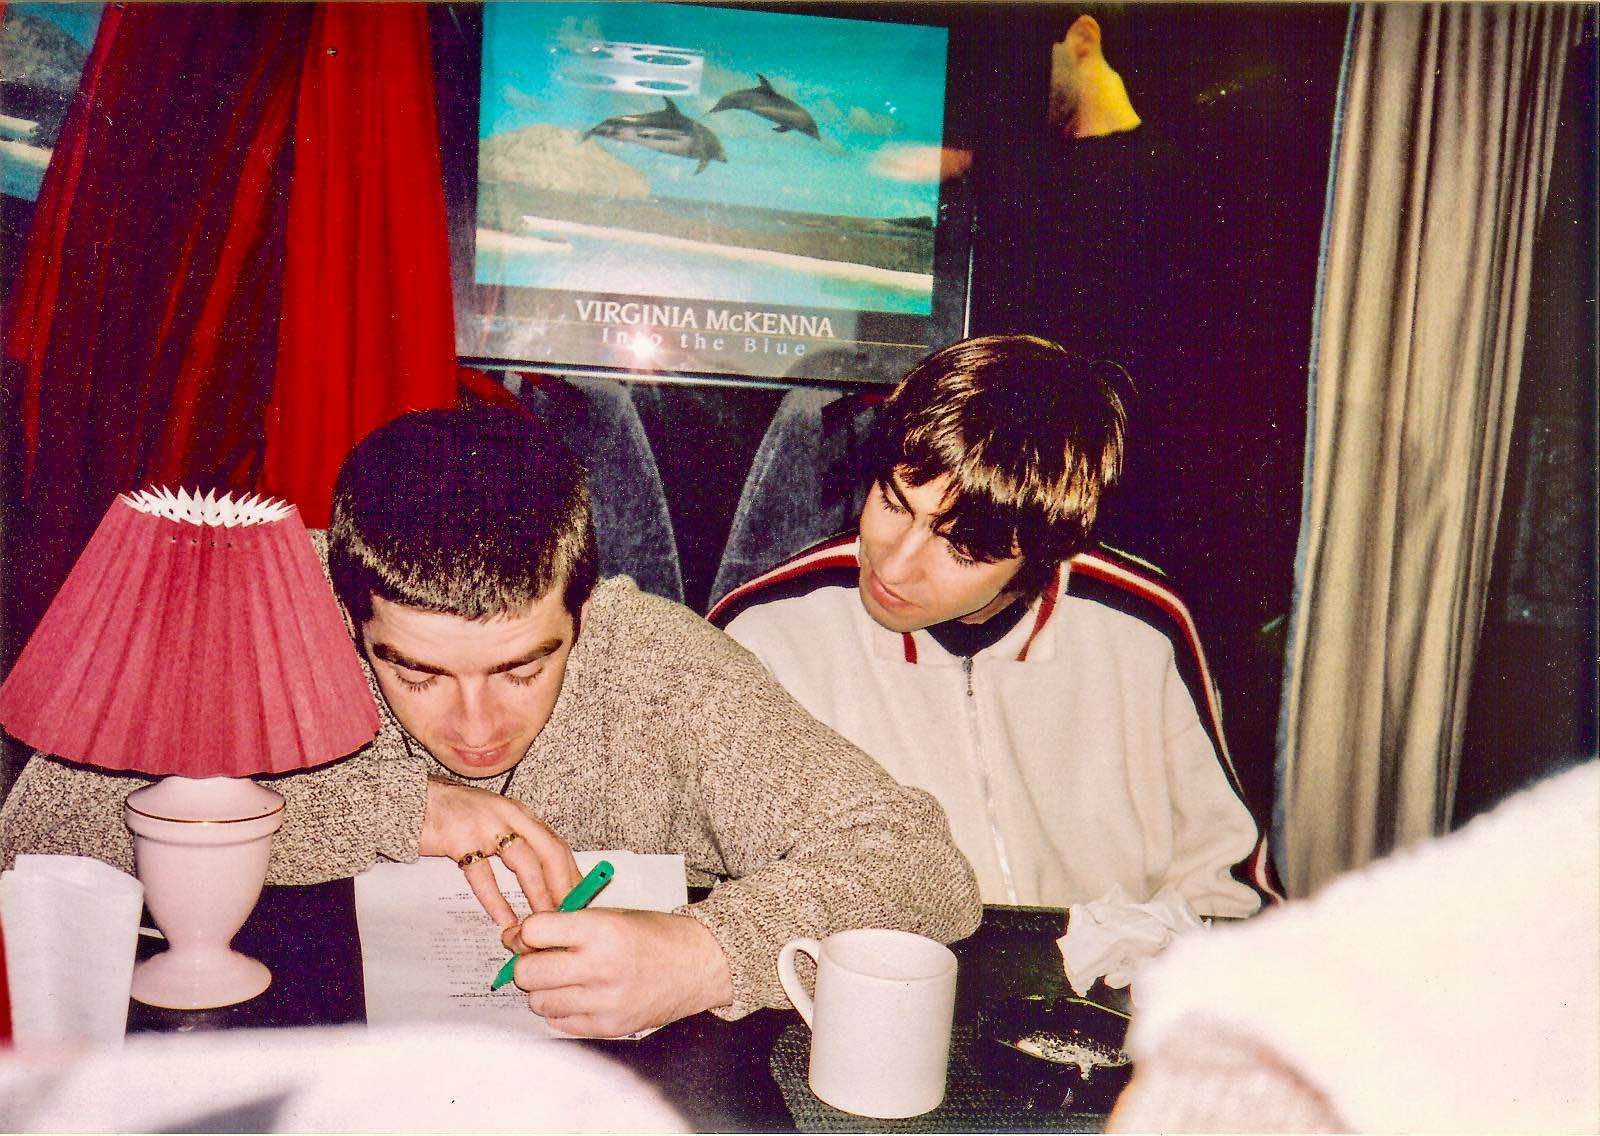 Noel at a table on a tour bus, writing on a sheet of paper with a green pen and a red lamp in frint of him, with Liam sitting close looking over his shoulder